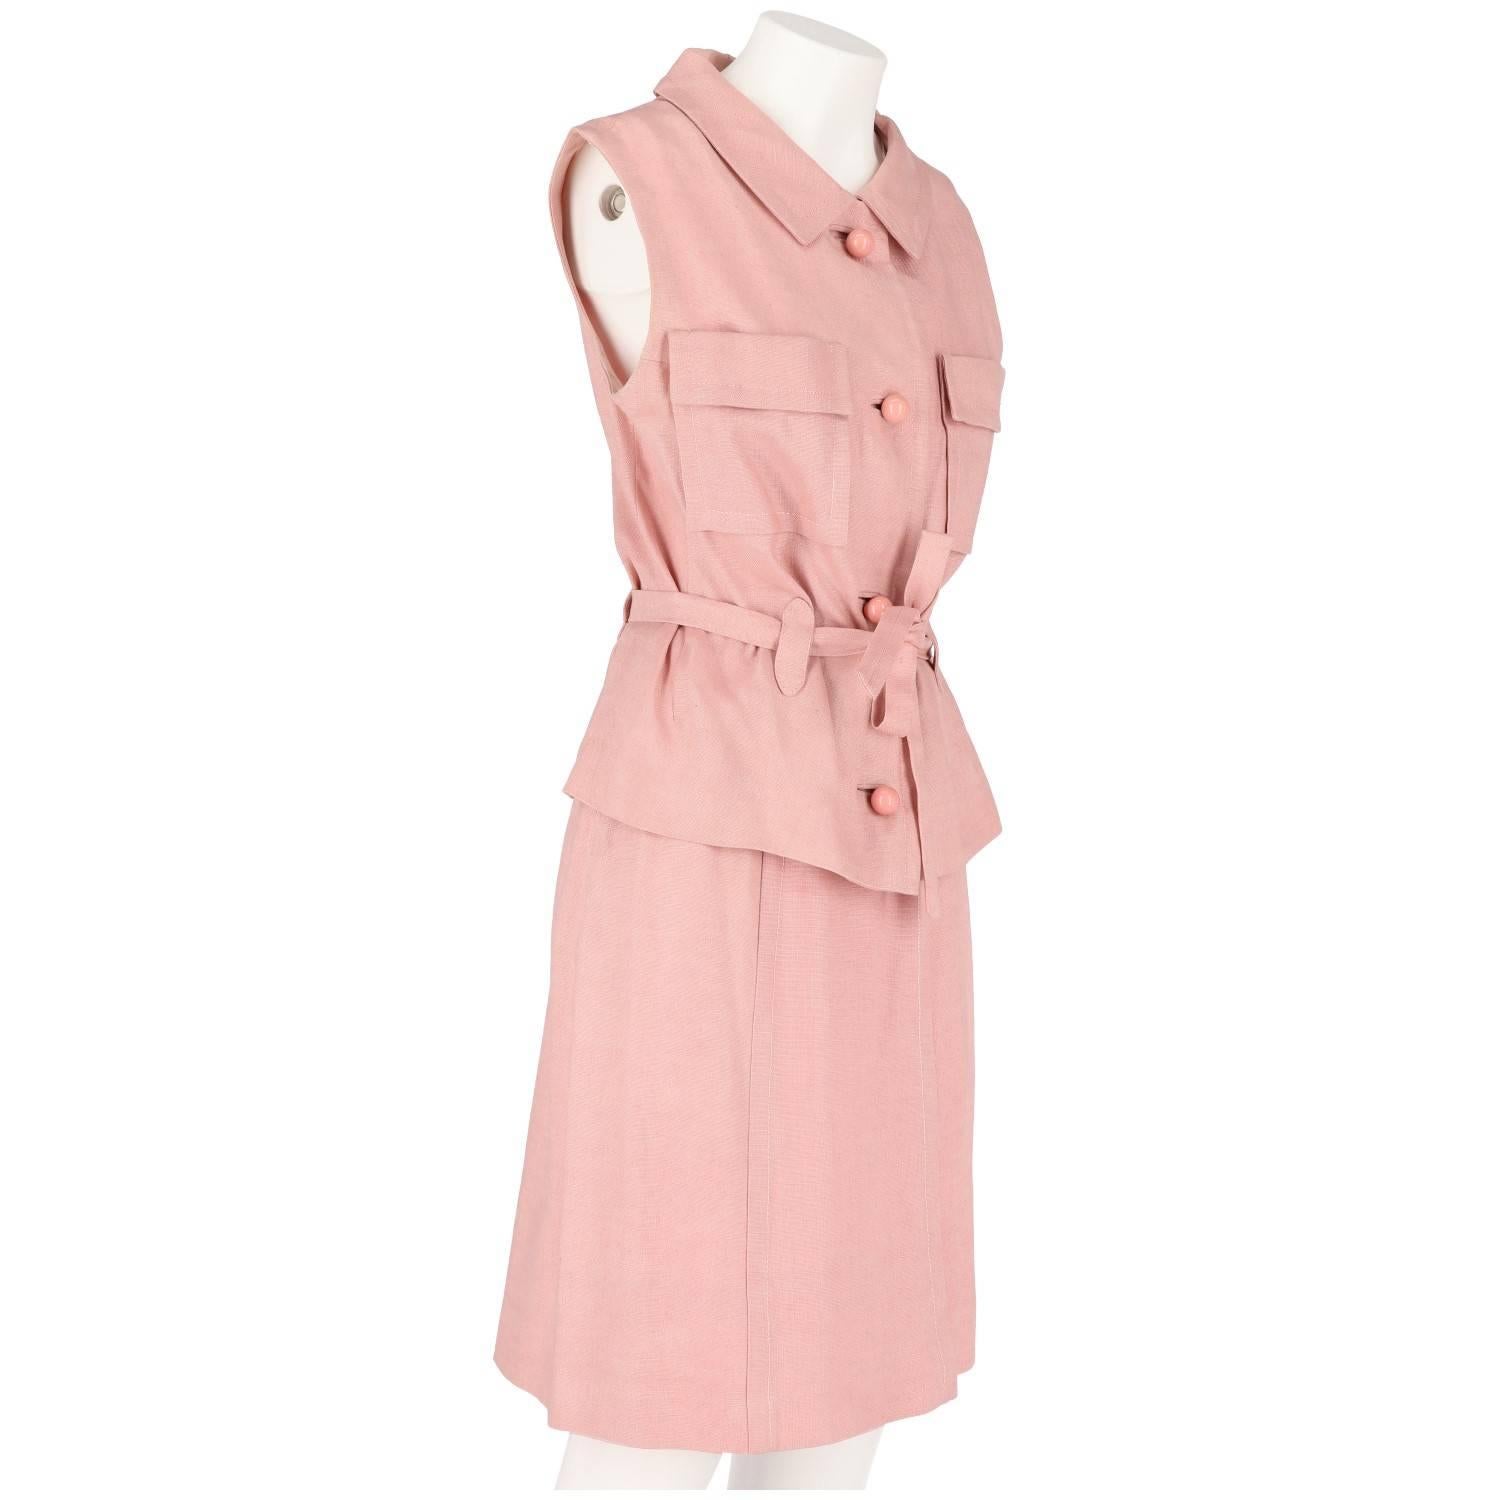 Beautiful two piece tailored suit in pink linen. It features a sleeveless top with thick pink buttons, two patch pockets on the bust and a waistband, and a flared skirt with lateral zip closure and button. The item is vintage, it was produced in the